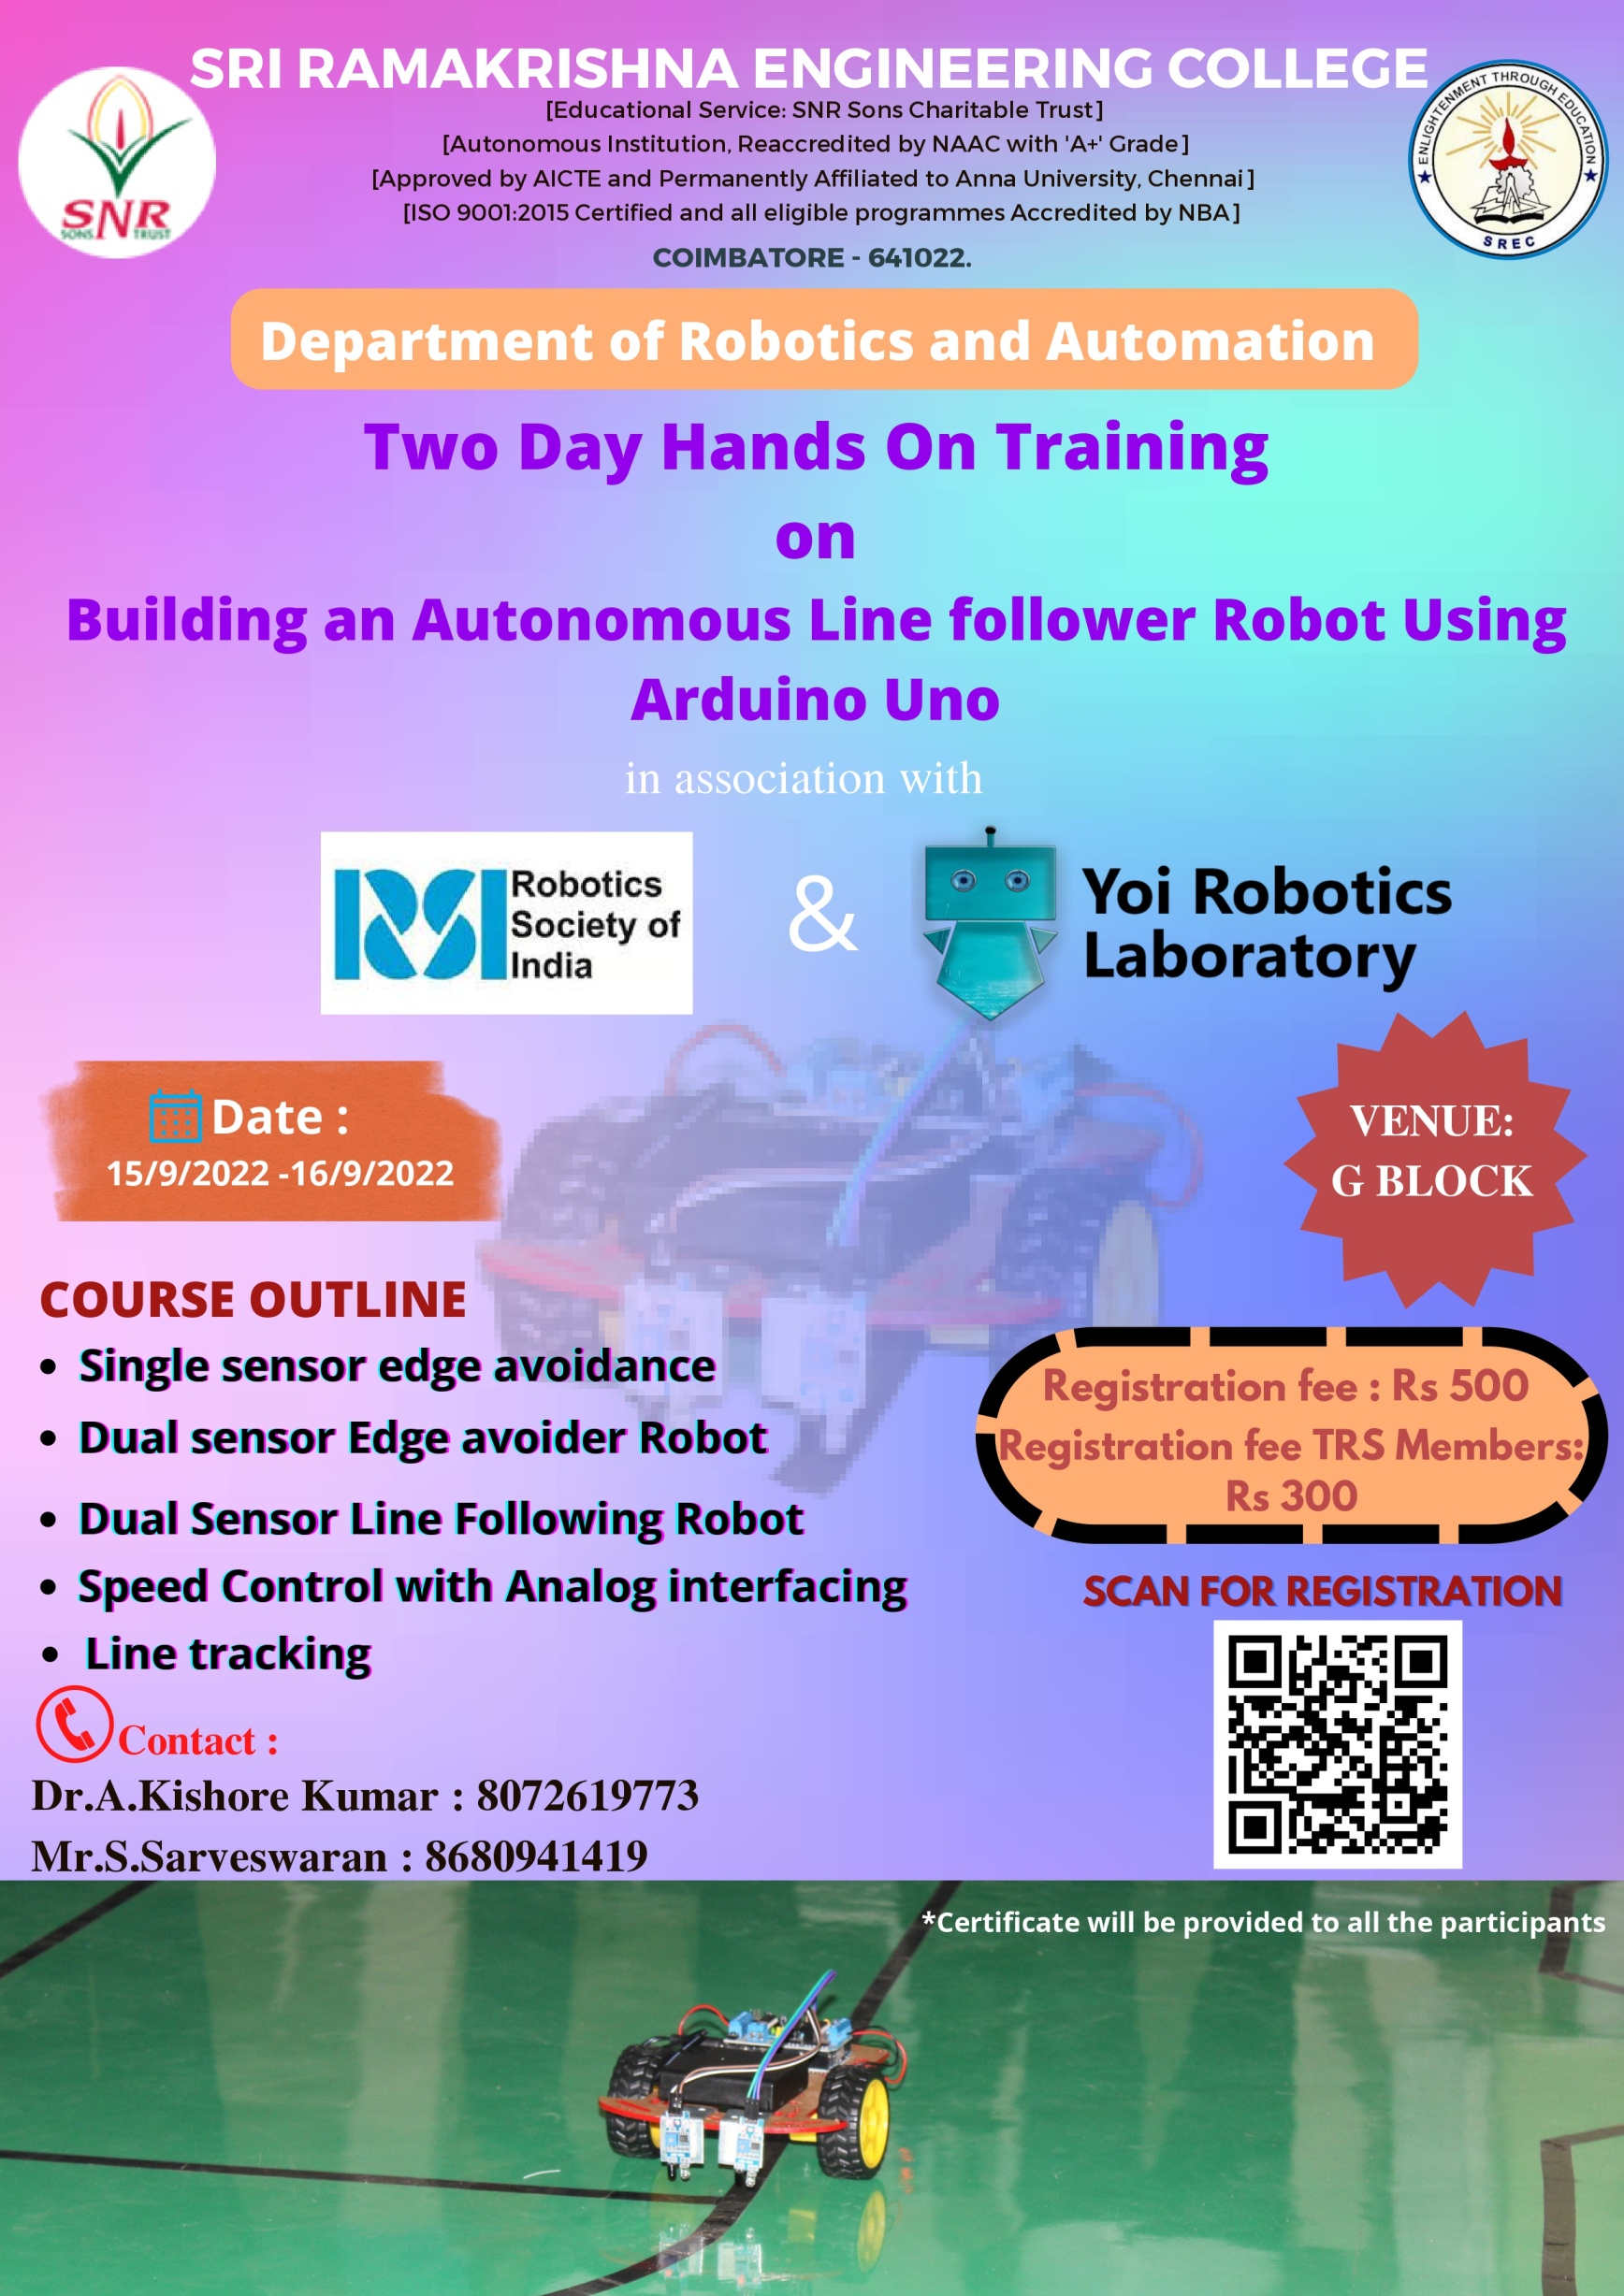 Two Day Hands On Training on Building an Autonomous Line follower Robot Using Arduino Uno 2022